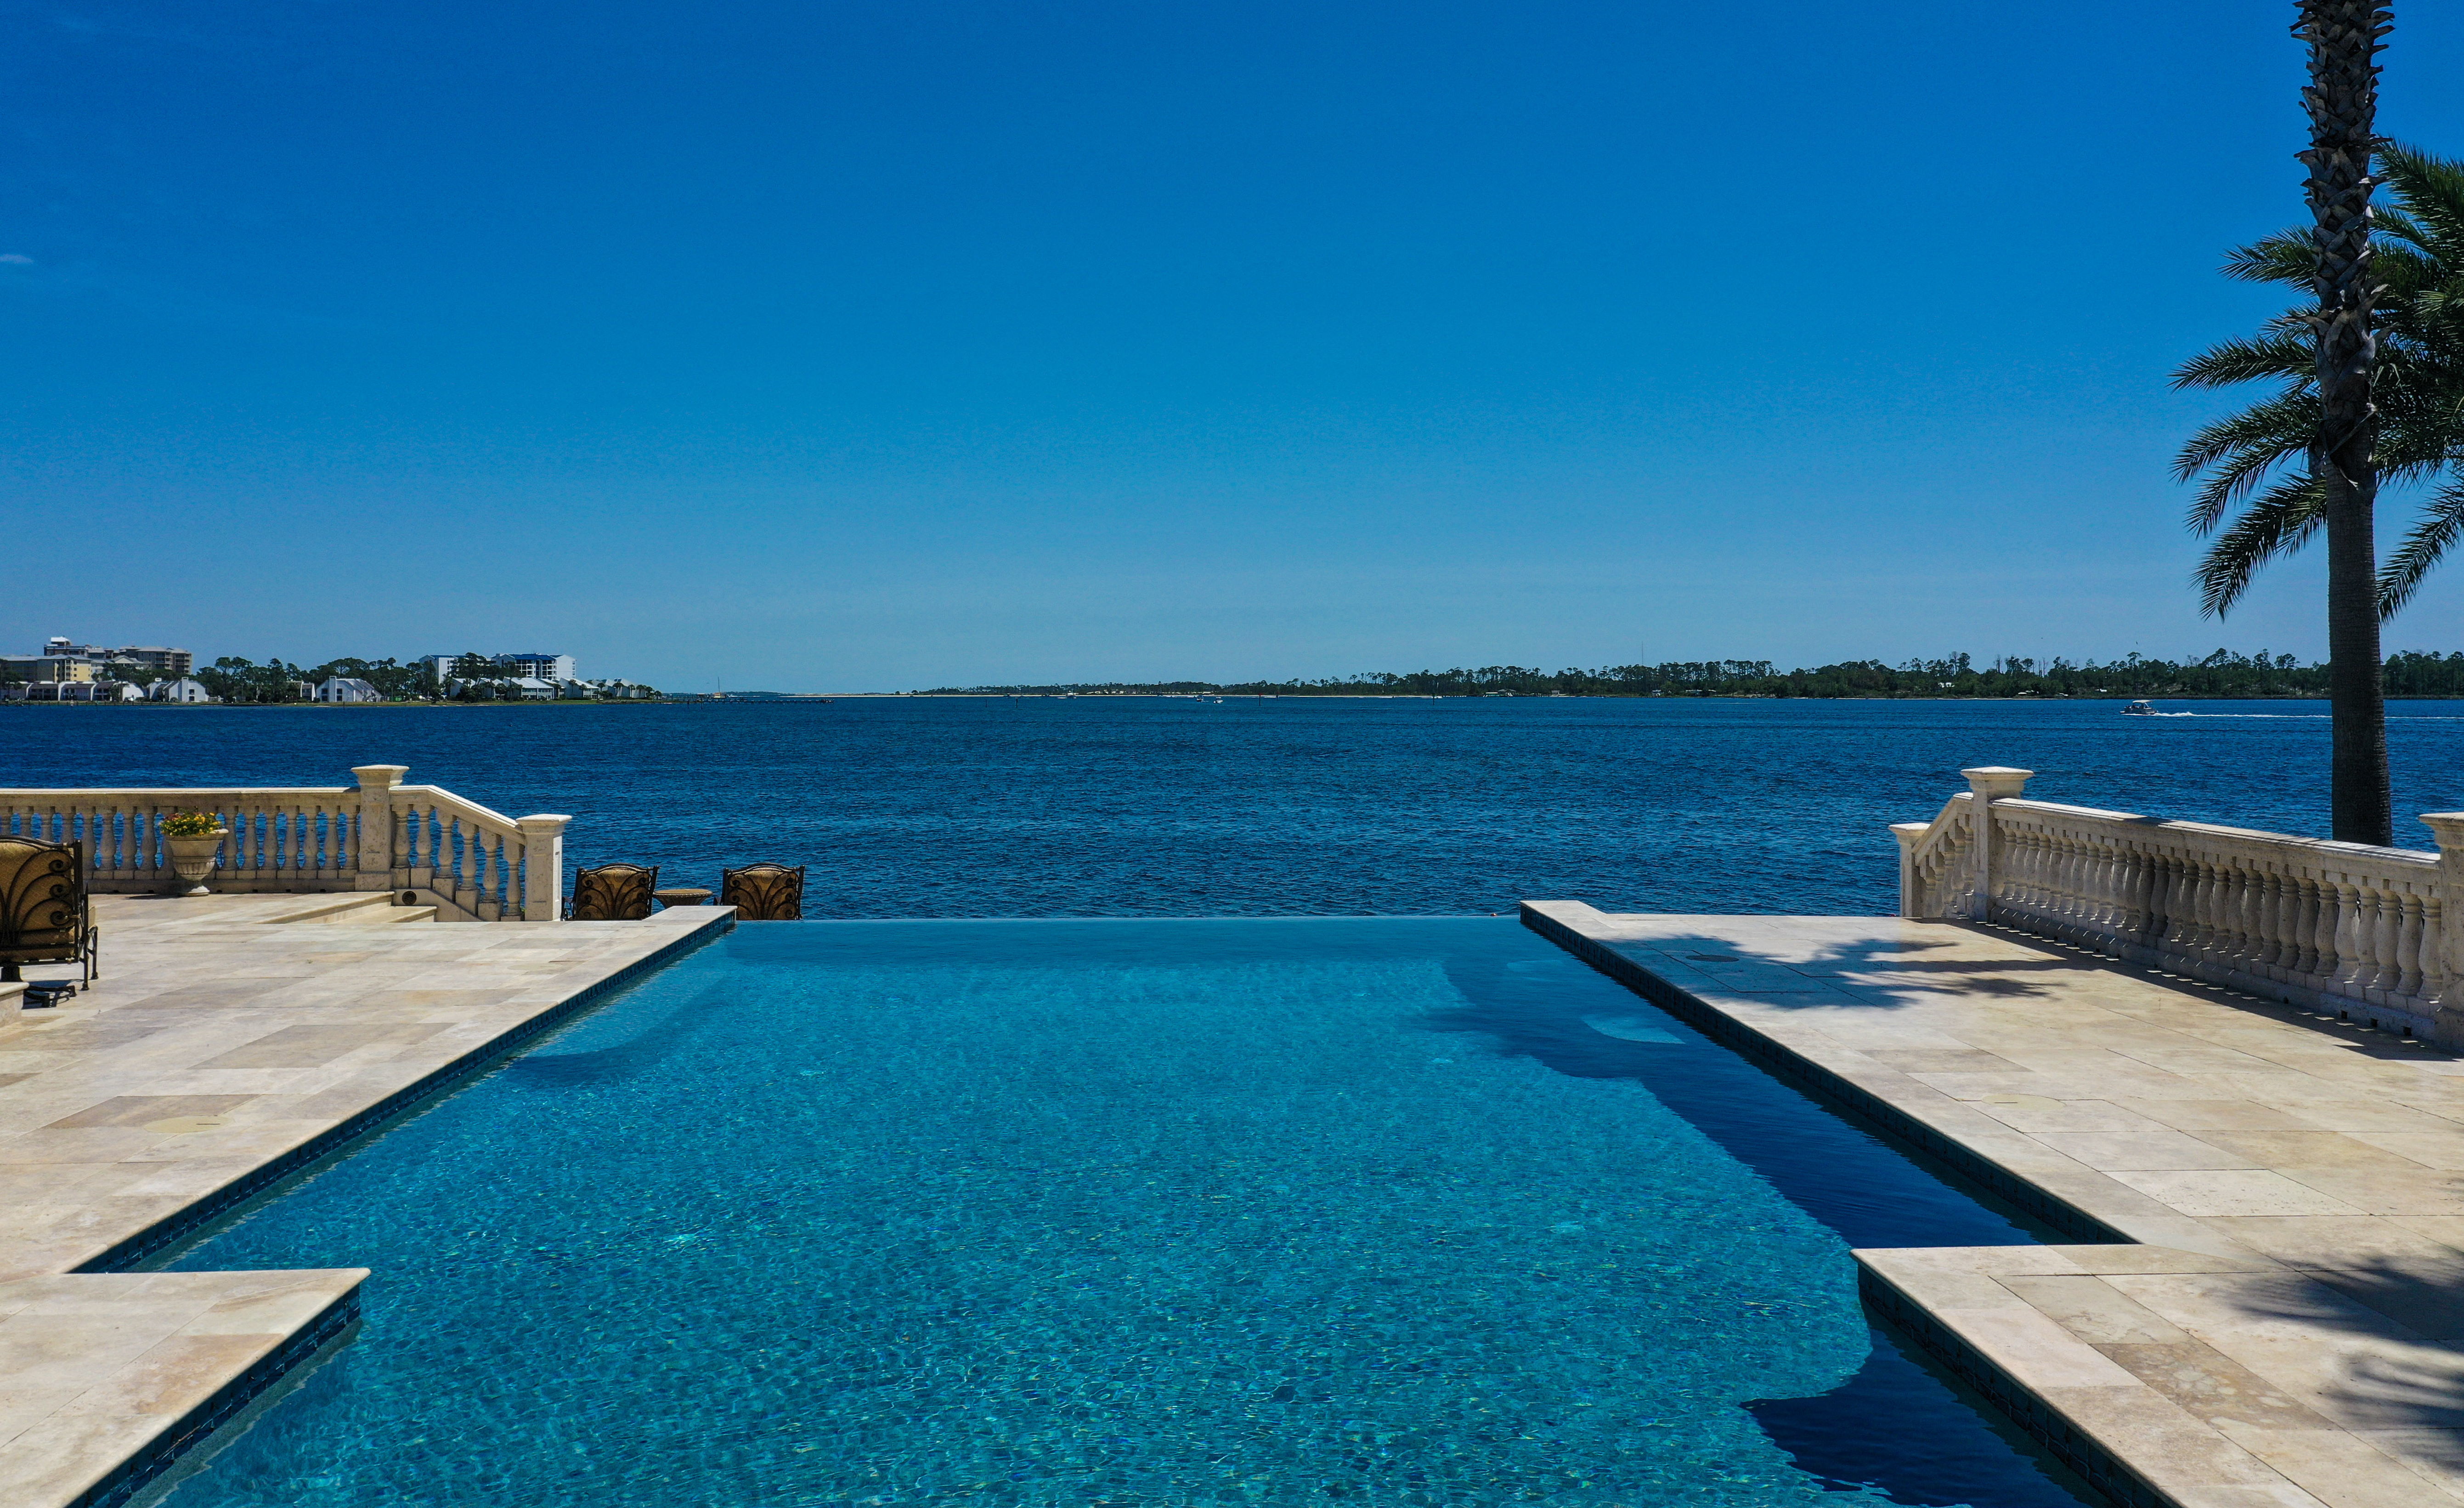 Destin bayfront home with pool